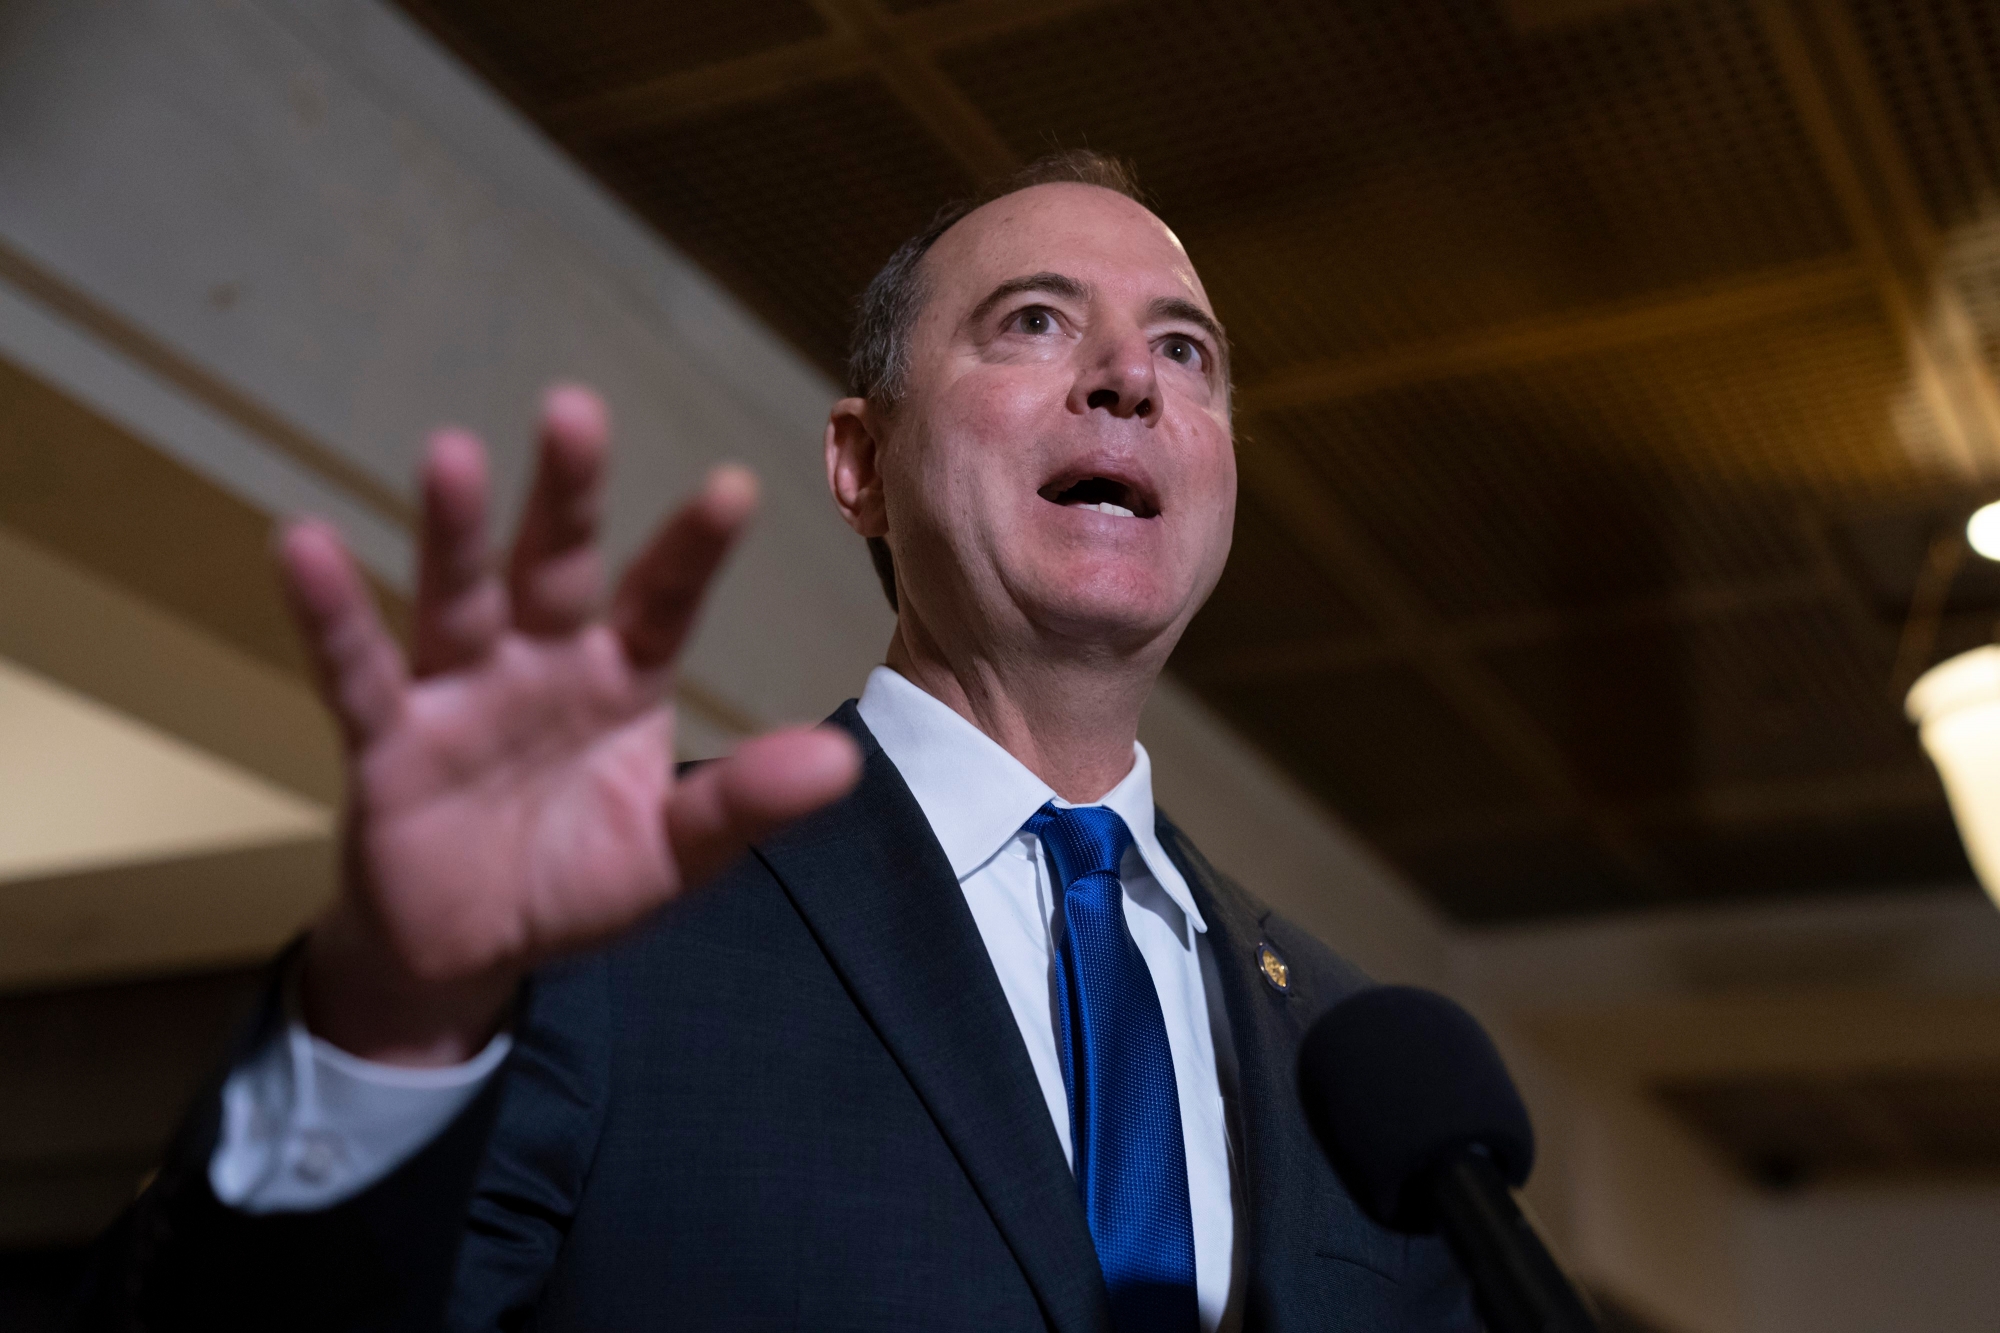 Rep. Adam Schiff, chairman of the House Intelligence Committee, speaks to reporters after witnesses failed to appear under subpoena before House impeachment investigators following President Donald Trump's orders not to cooperate with the probe, in Washington, Monday, Nov. 4, 2019. John Eisenberg, the lead lawyer for the National Security Council, and National Security Council aide Michael Ellis, were scheduled to testify early Monday but not appear. (AP Photo/J. Scott Applewhite) TRUMP IMPEACHMENT